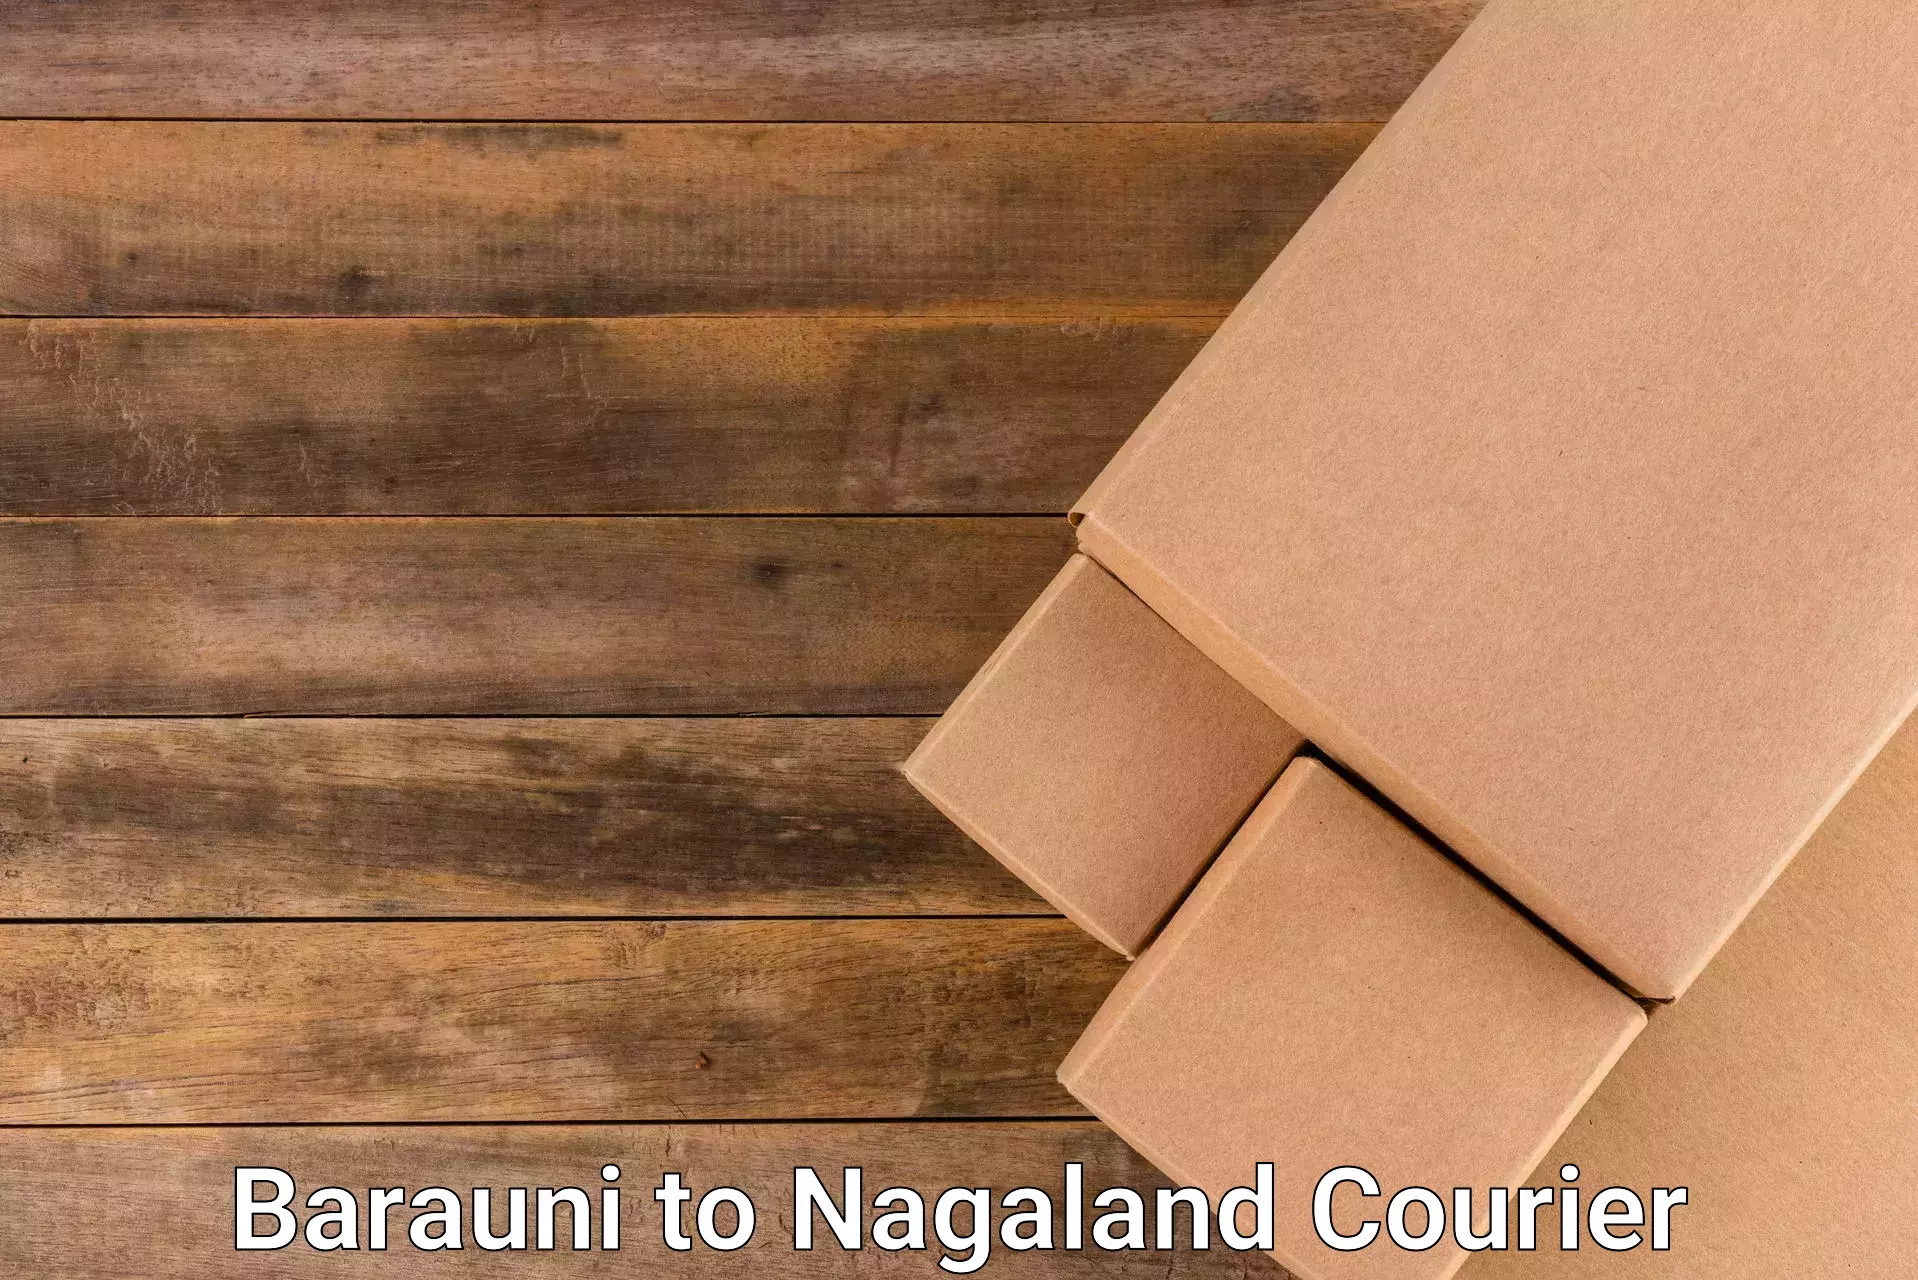 Same-day delivery solutions Barauni to Nagaland